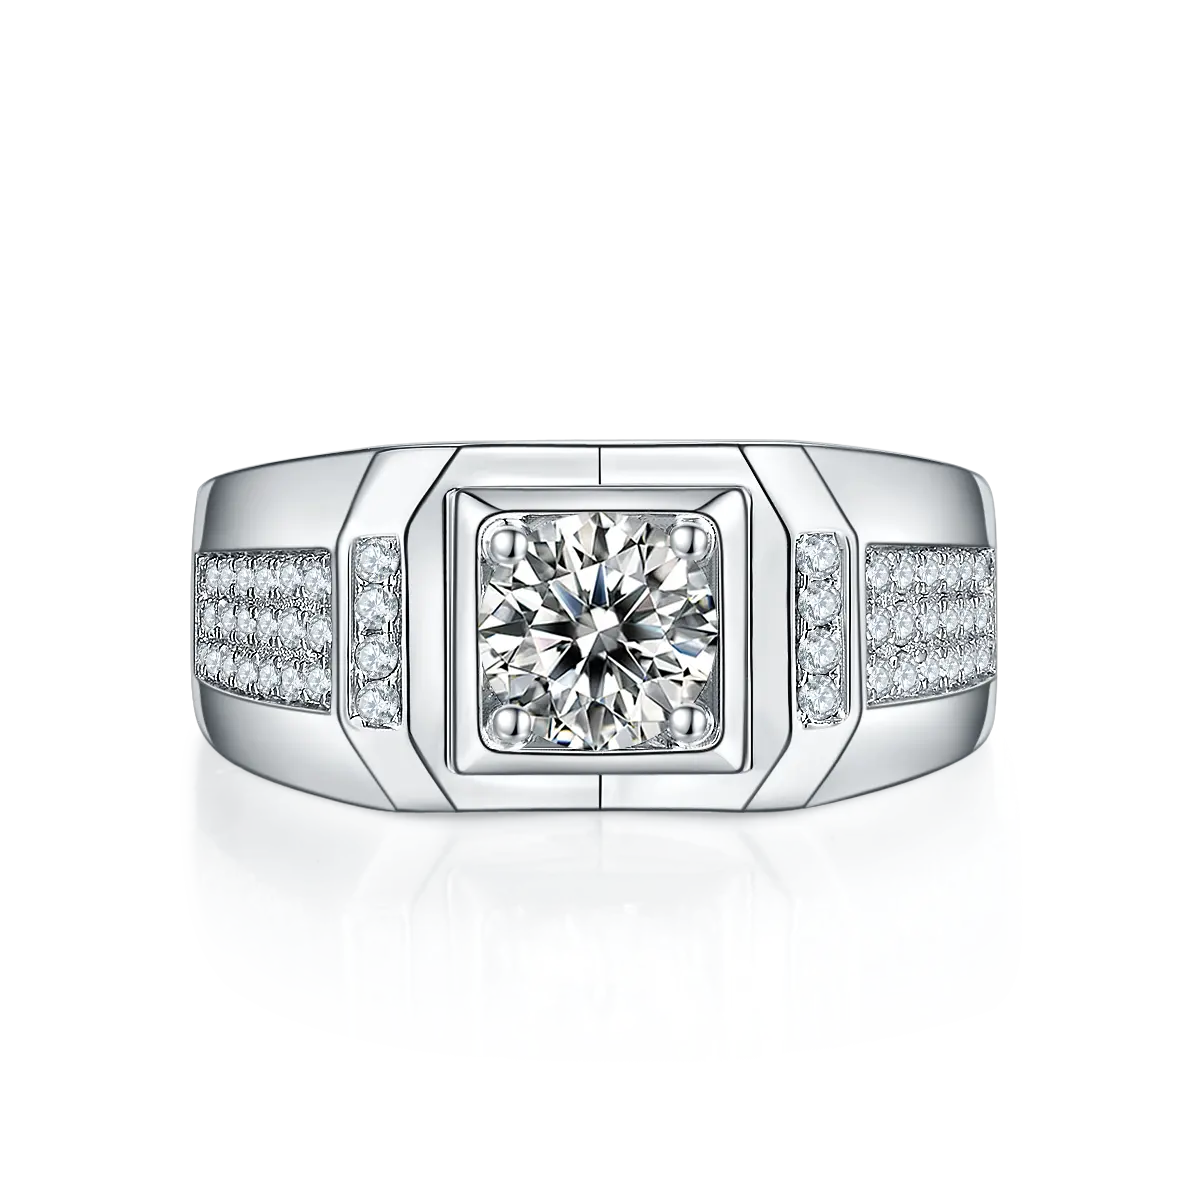 HOT SALE Wholesale High Quality Moissanite Jewelry 925 Sterling Silver Man Ring Gemstone